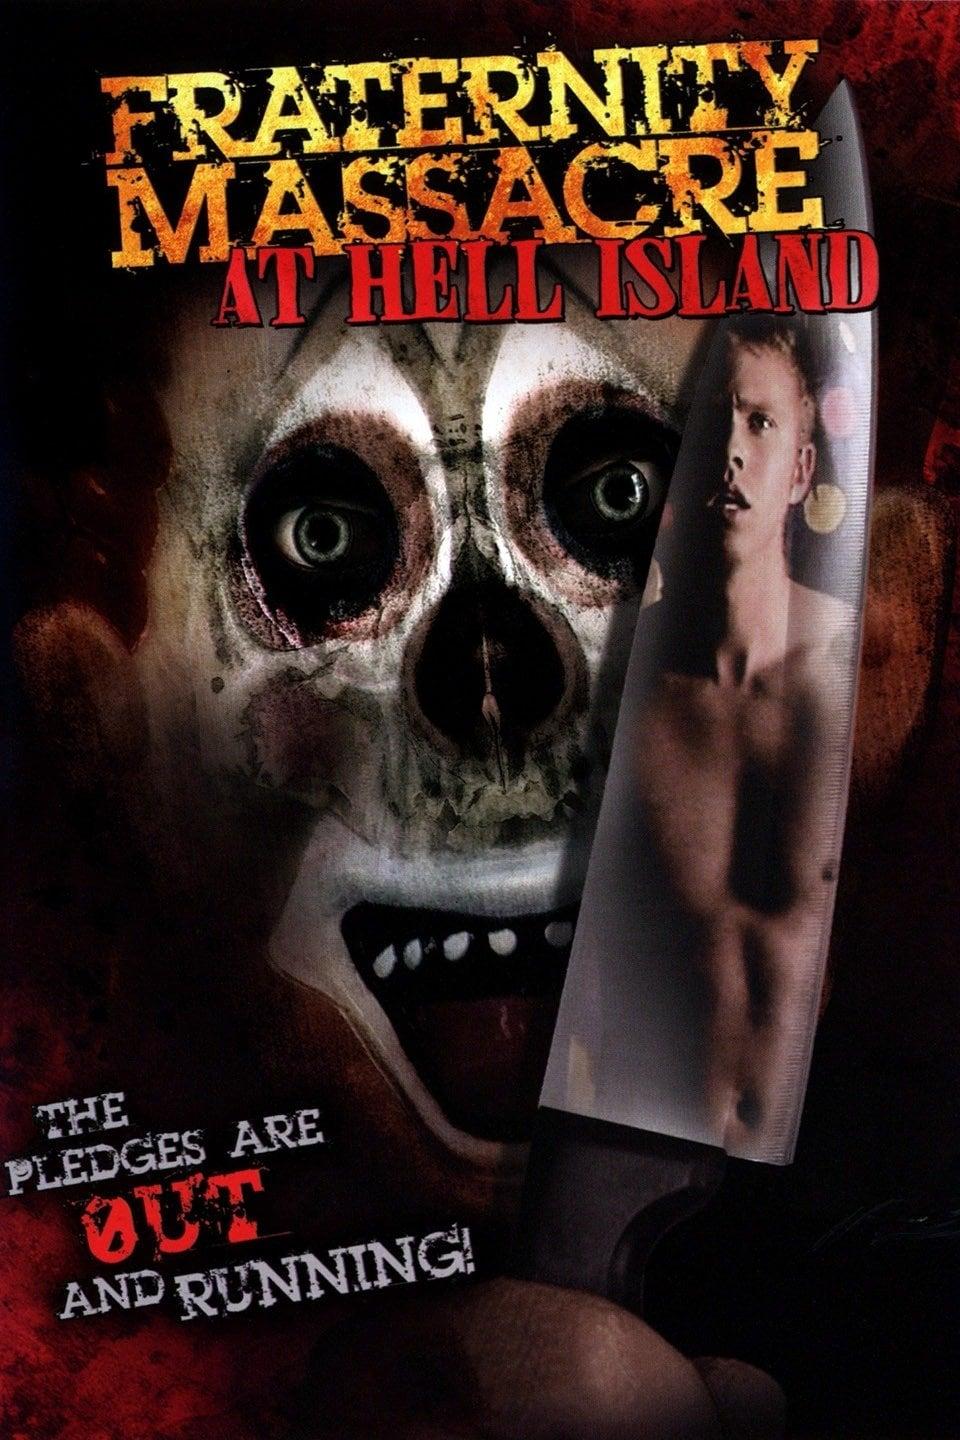 Fraternity Massacre at Hell Island poster